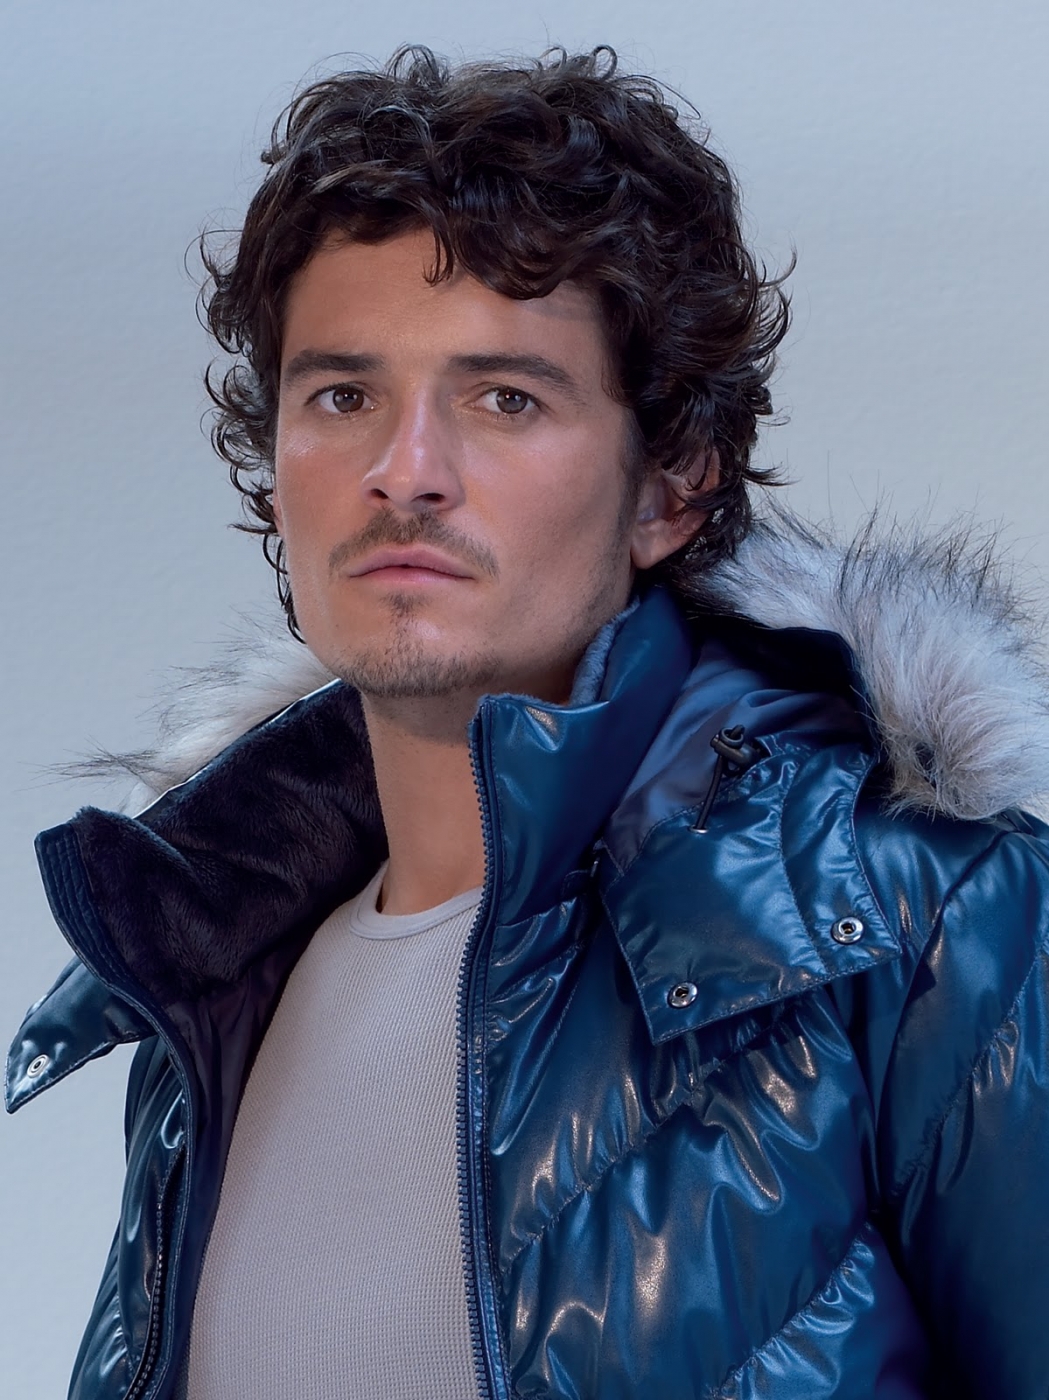 Orlando Bloom Pictures